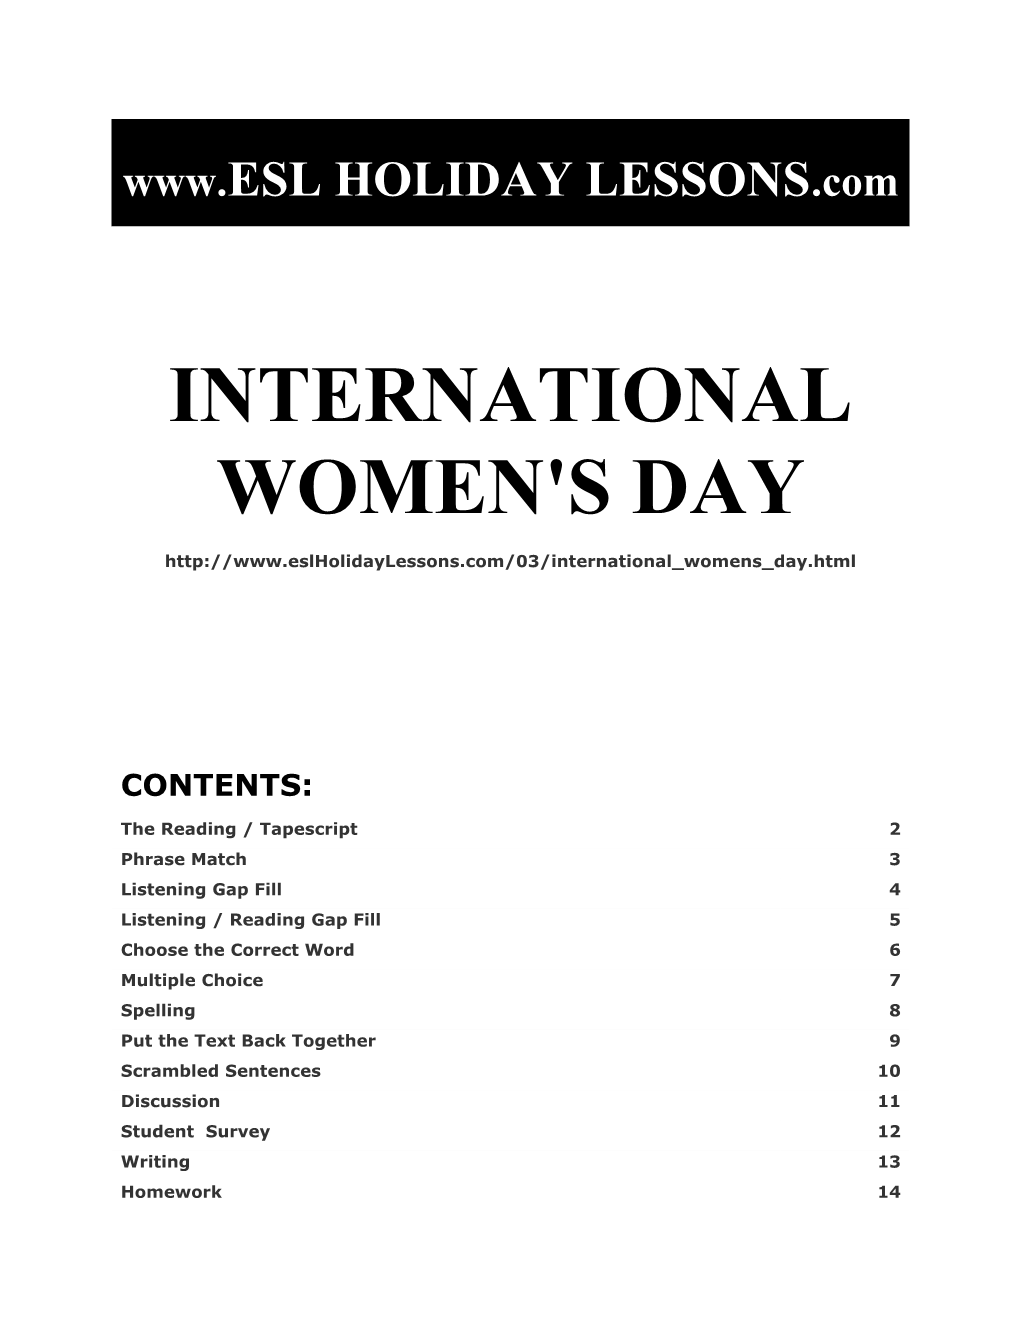 Holiday Lessons - International Women's Day